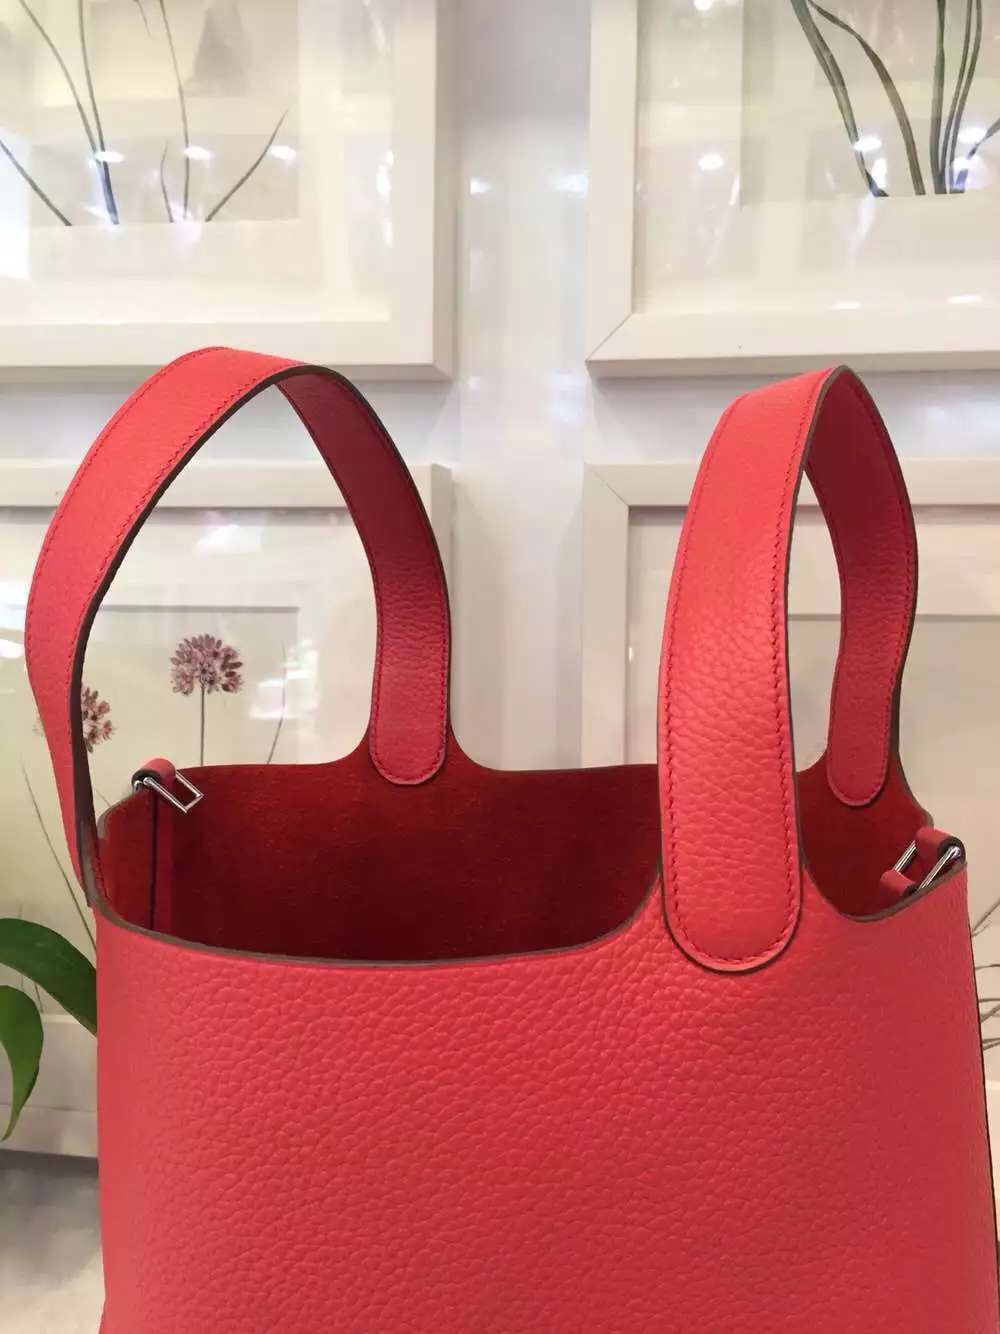 Luxury Hermes France Togo Leather Picotin Lock Bag in 2R Peony Red Two Size